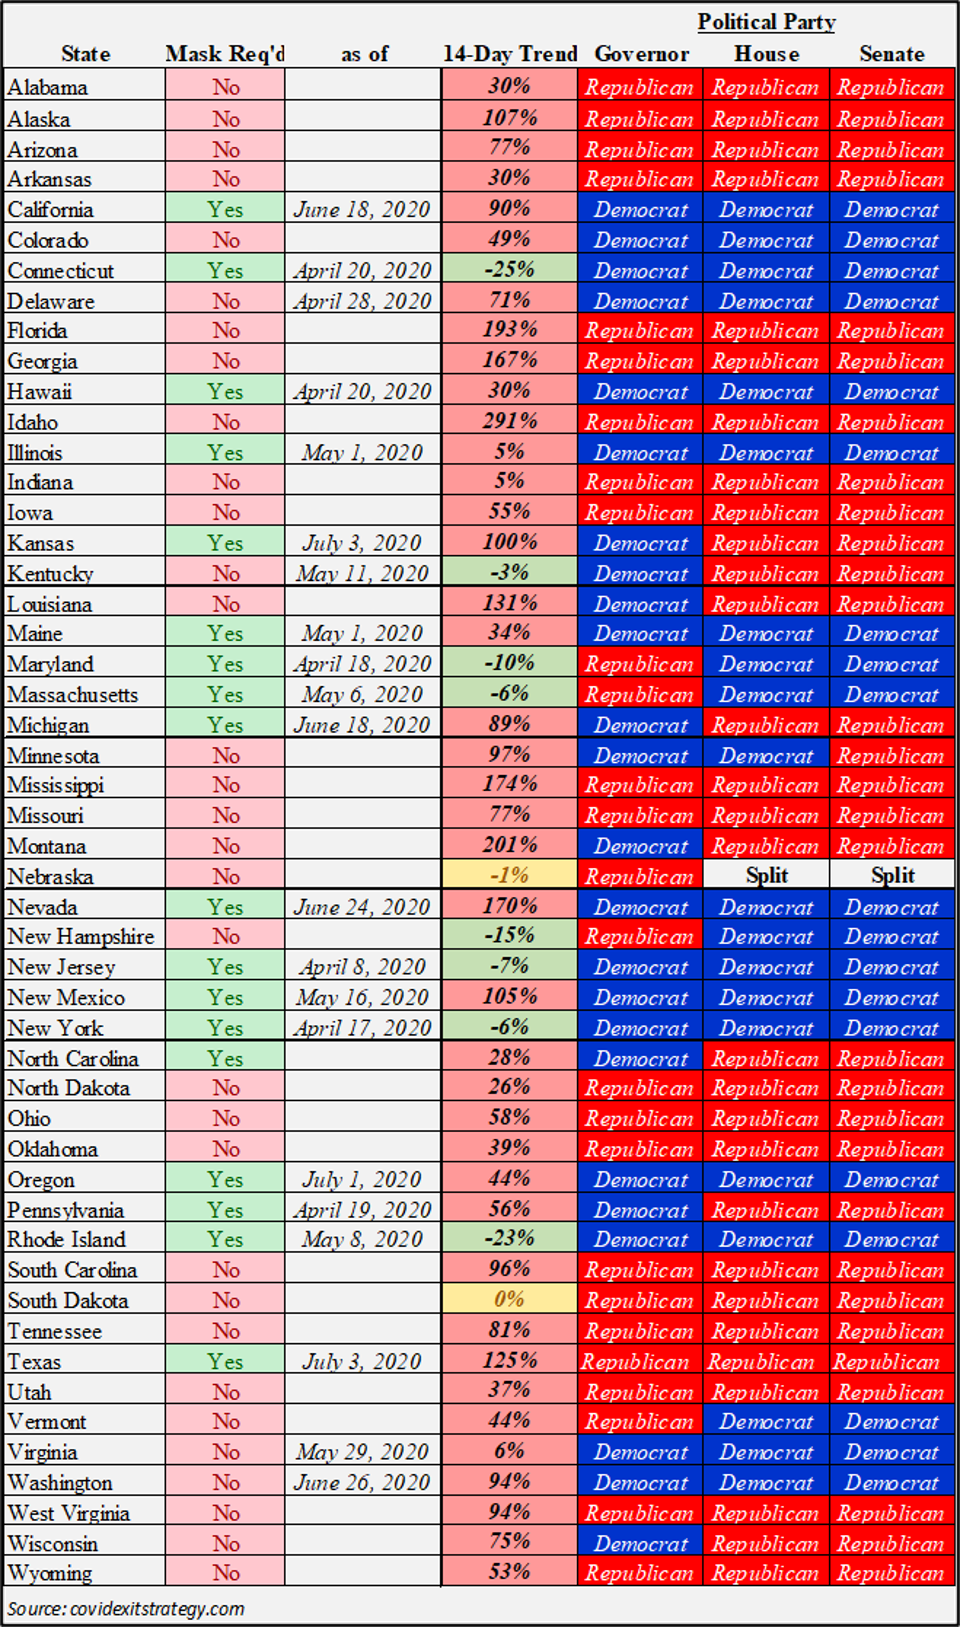 Covid 19 Data - State by State